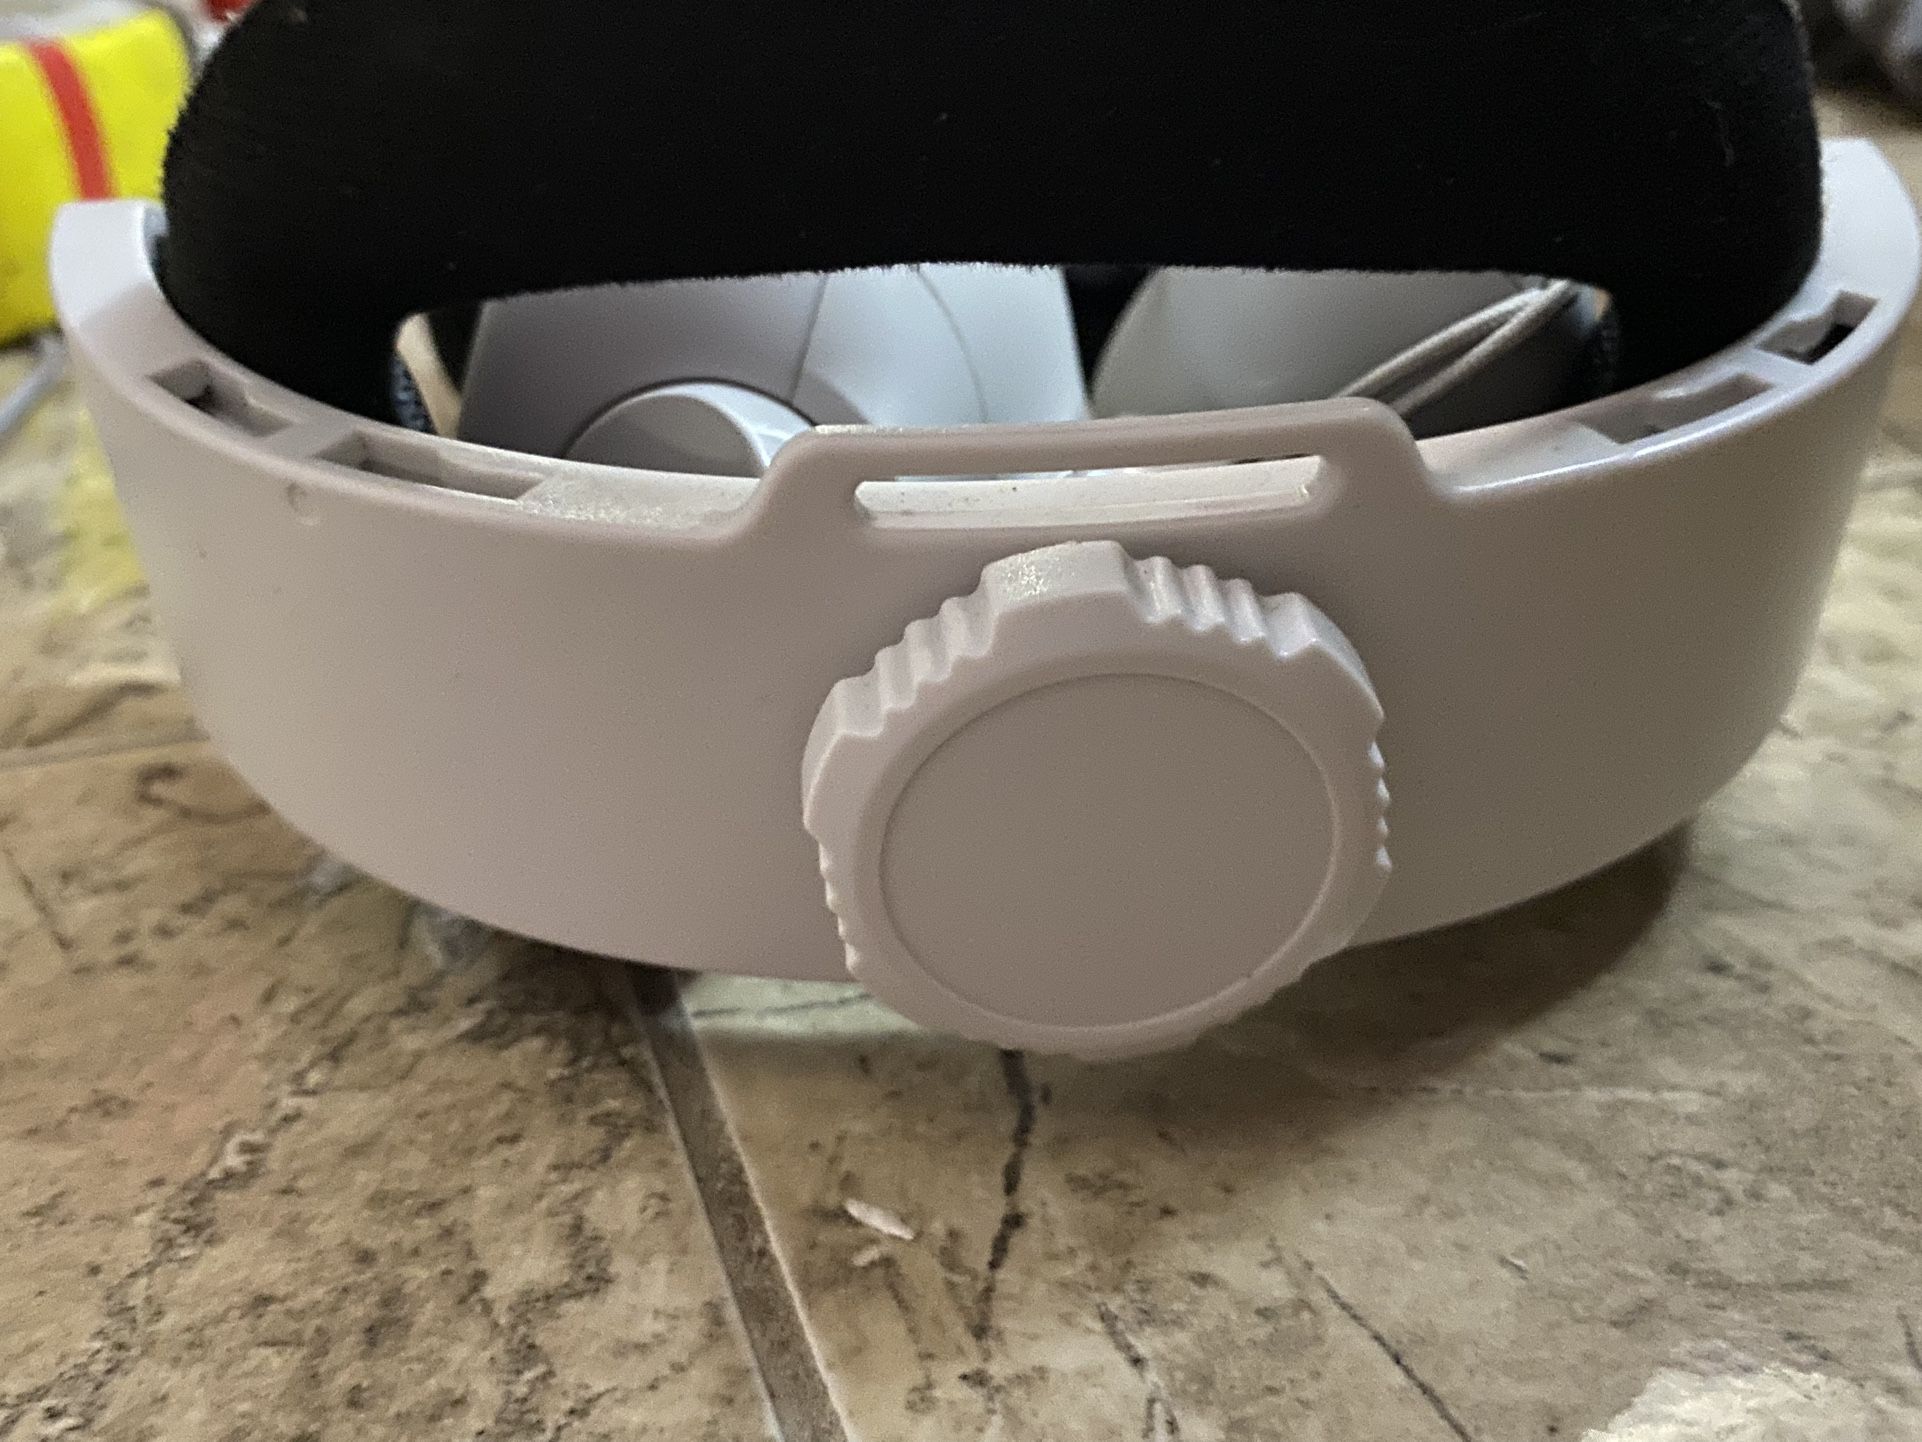 OCULUS QUEST 2 (USED BUT WORKS LIKE NEW)